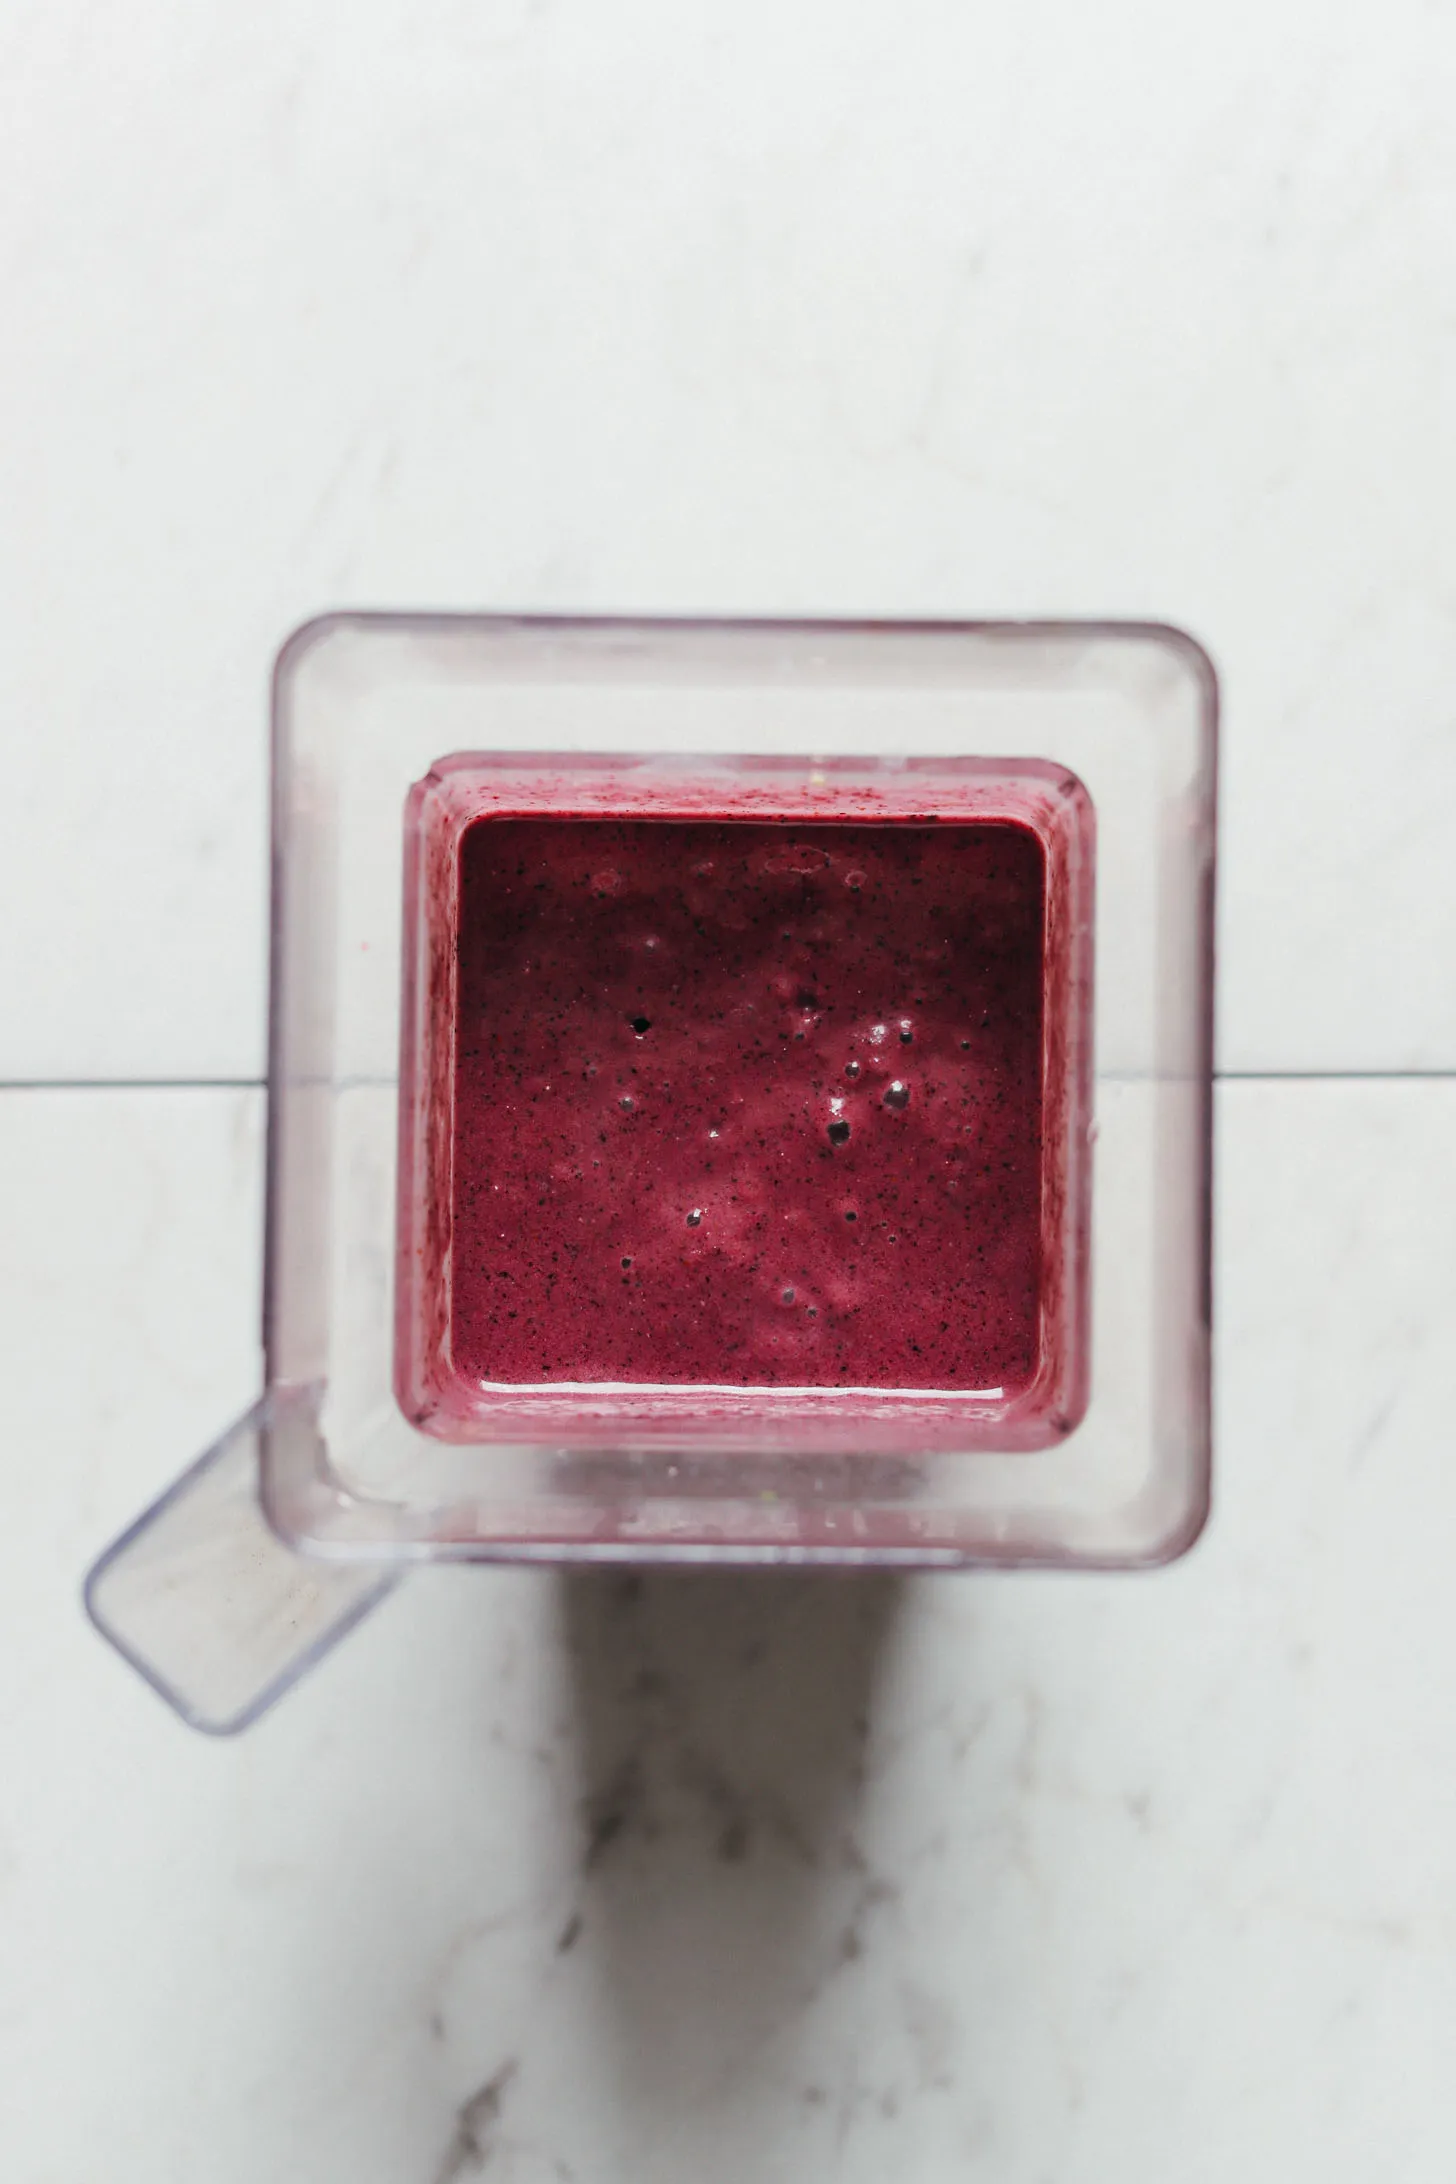 Top view of our beautiful and healthy Zucchini Berry Smoothie in the blender